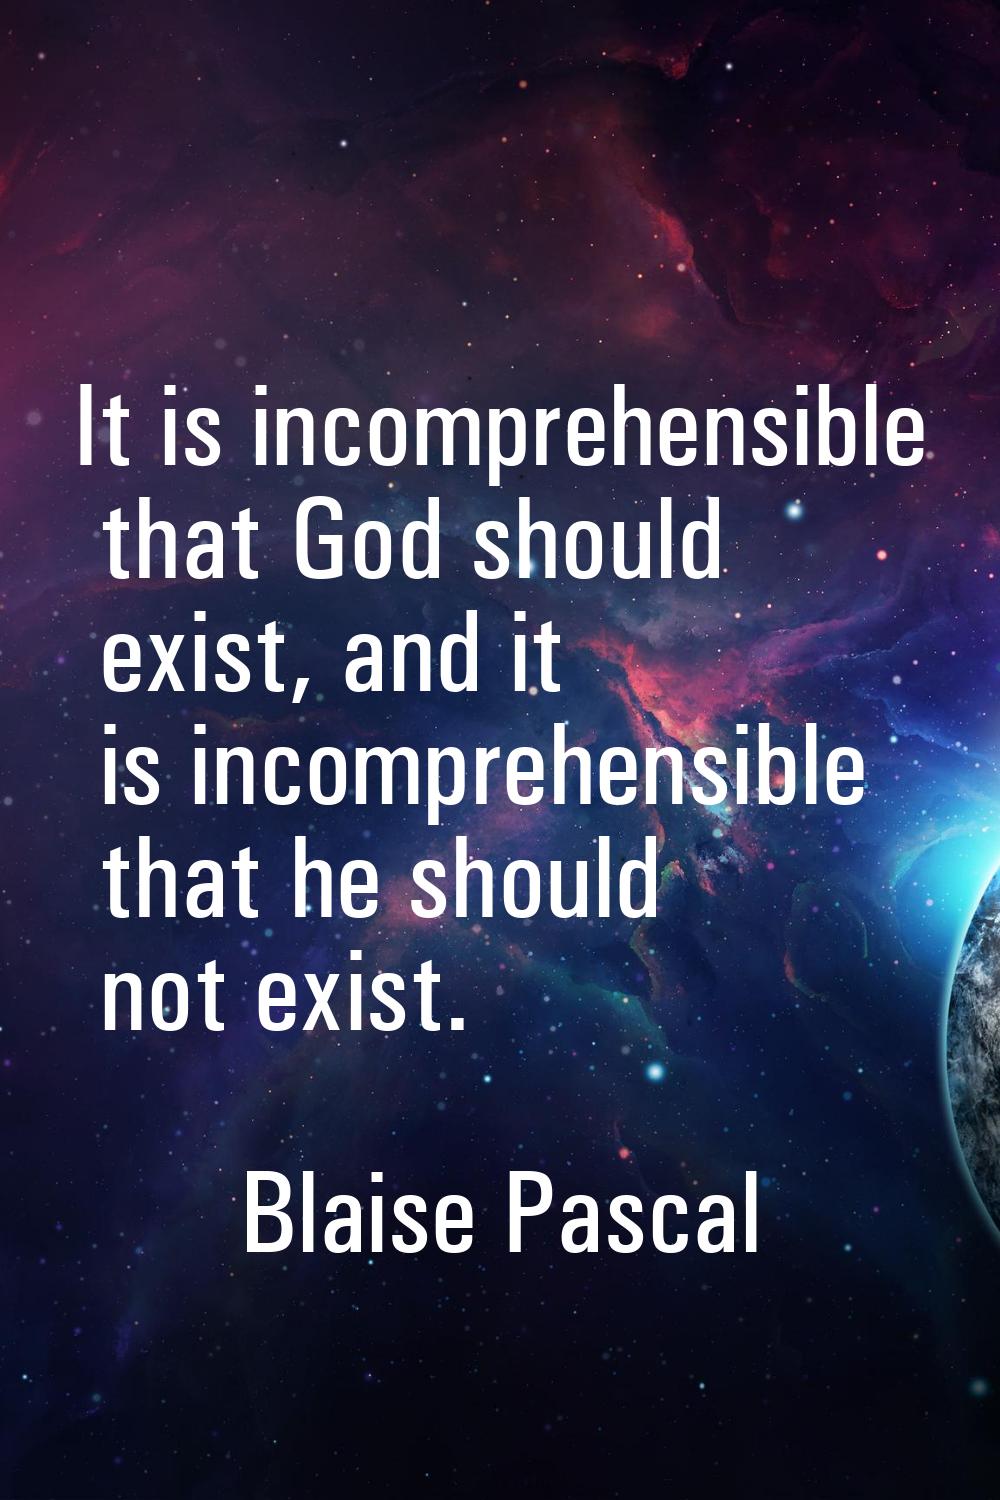 It is incomprehensible that God should exist, and it is incomprehensible that he should not exist.